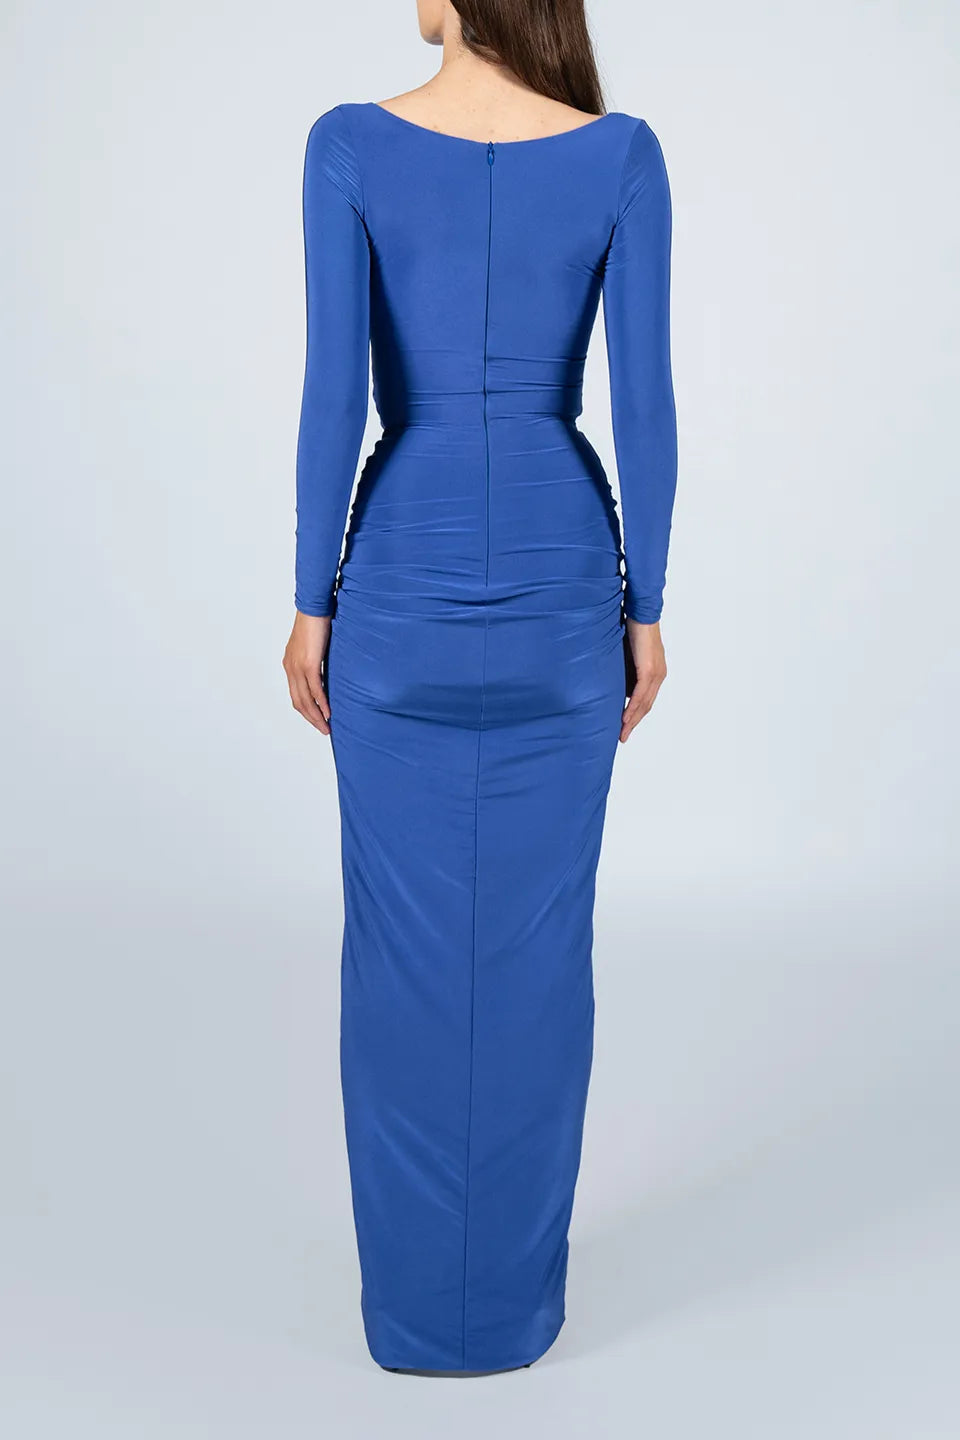 Designer Blue Maxi dresses, shop online with free delivery in UAE. Product gallery 6